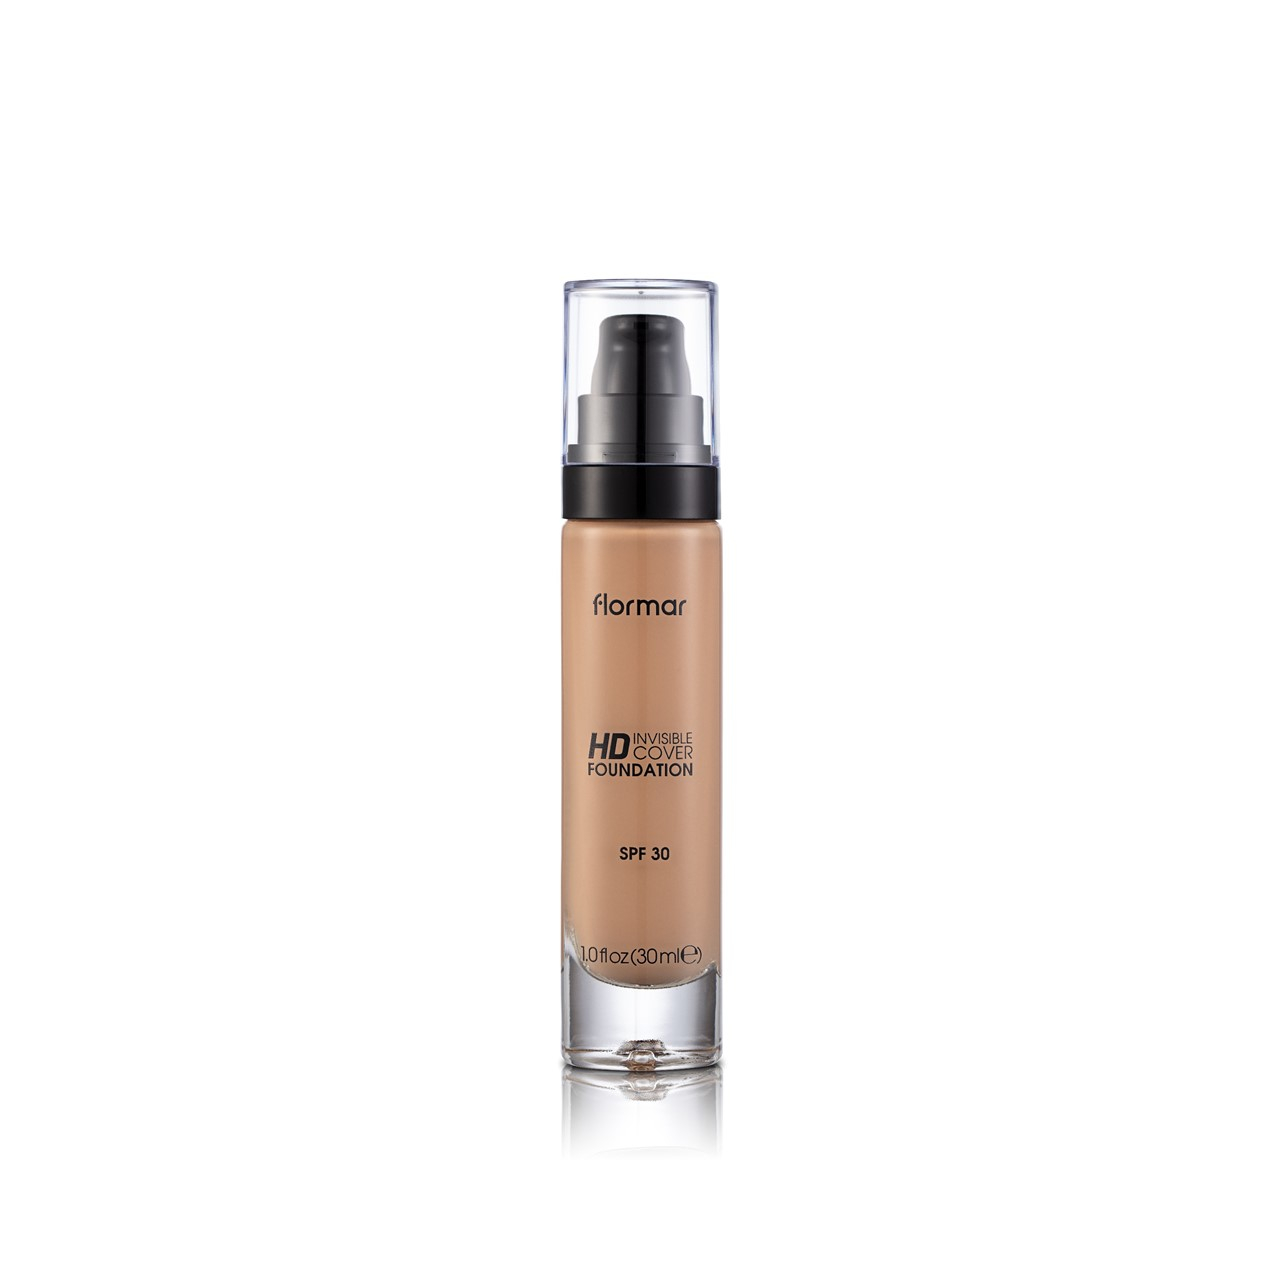 https://static.beautytocare.com/media/catalog/product/f/l/flormar-invisible-cover-hd-foundation-100-medium-beige-spf30-30ml_1.jpg